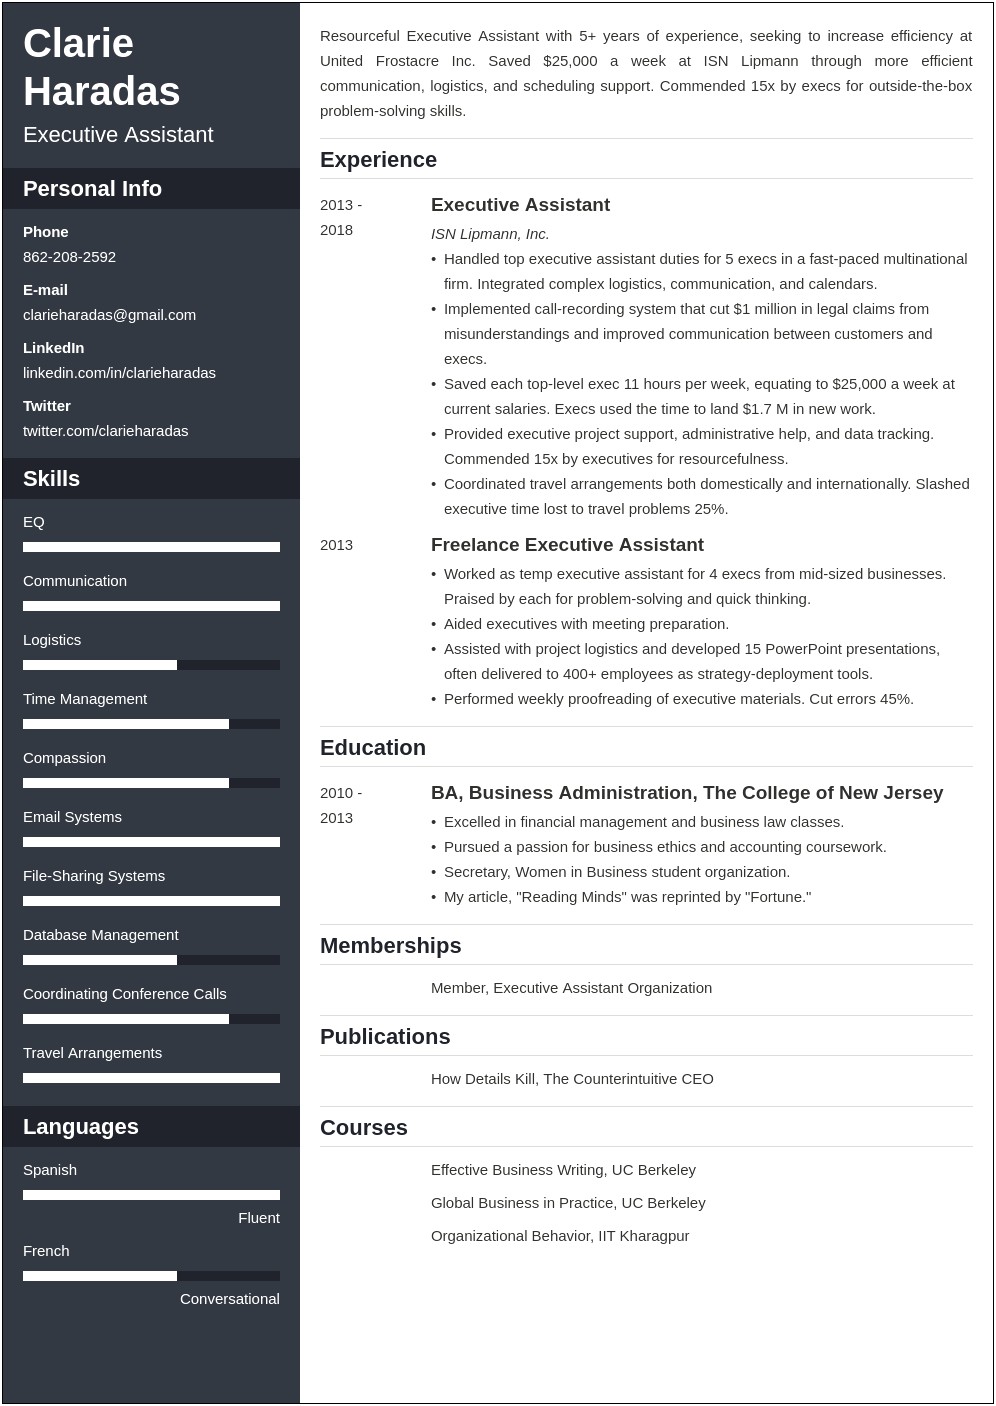 Resume Work Experience Most Relevant Or Most Recent